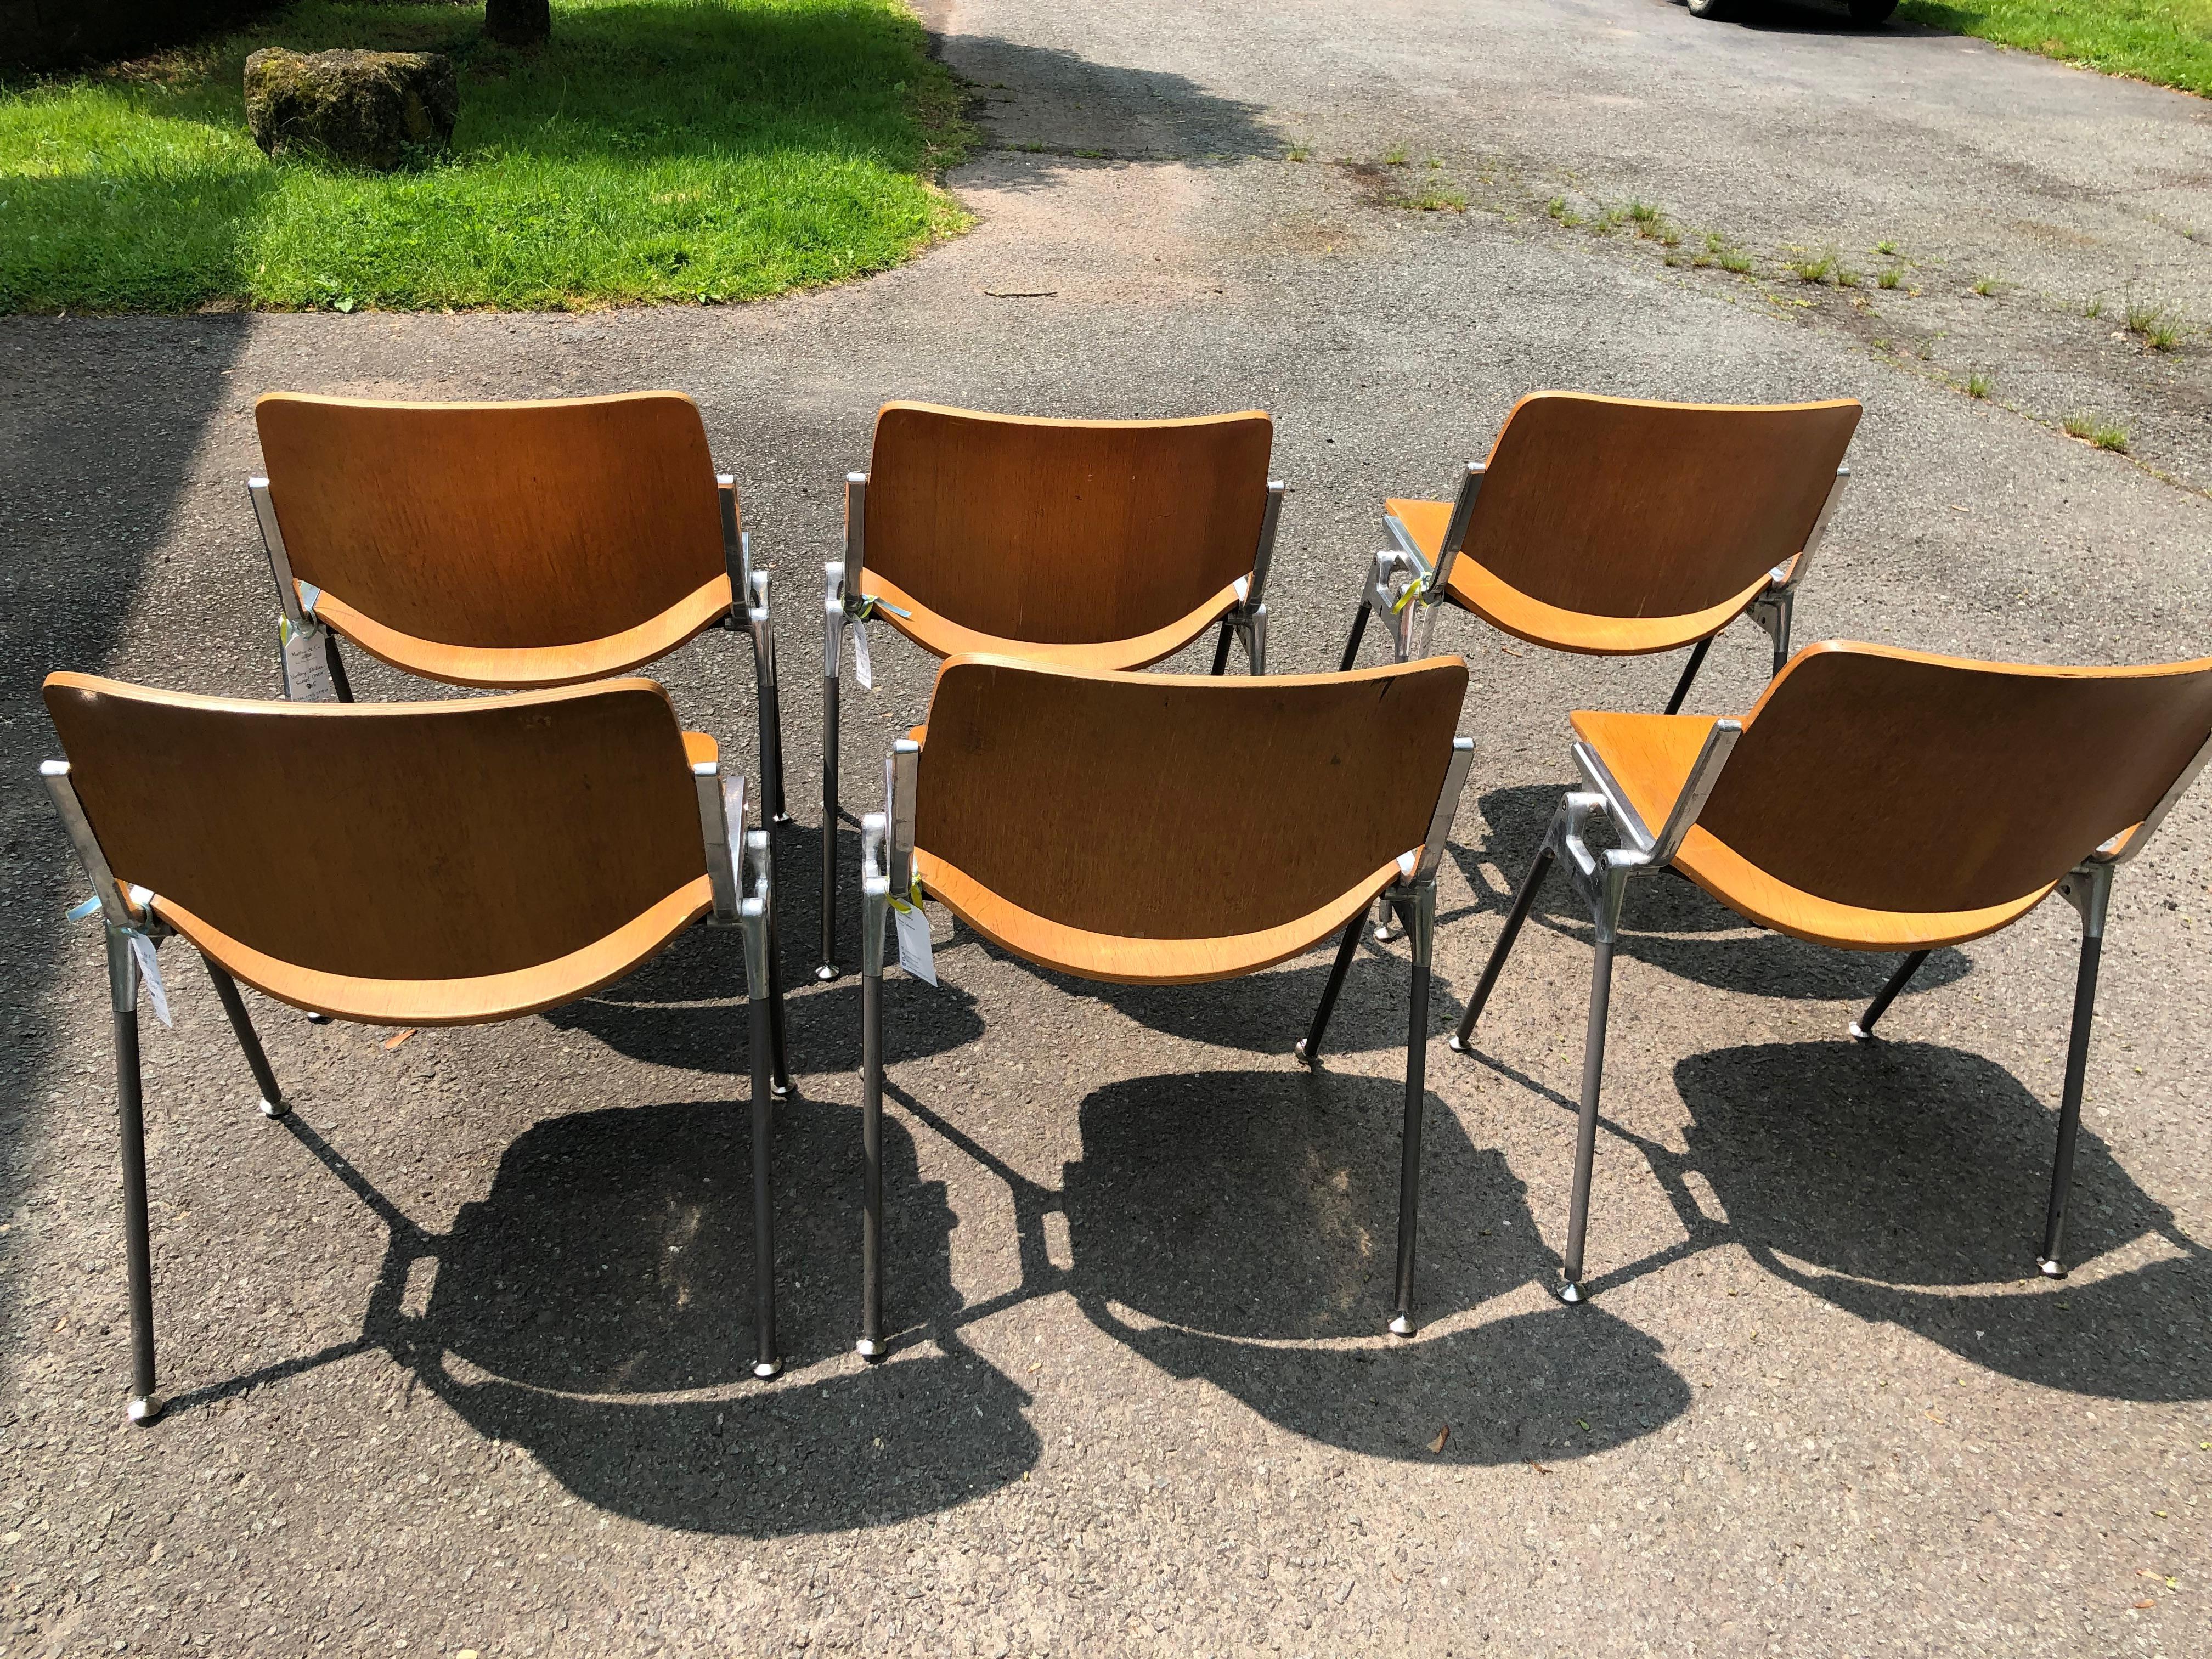  Set of 6 Mid-Century Modern Plywood & Steel Schoolhouse Dining Chairs 6